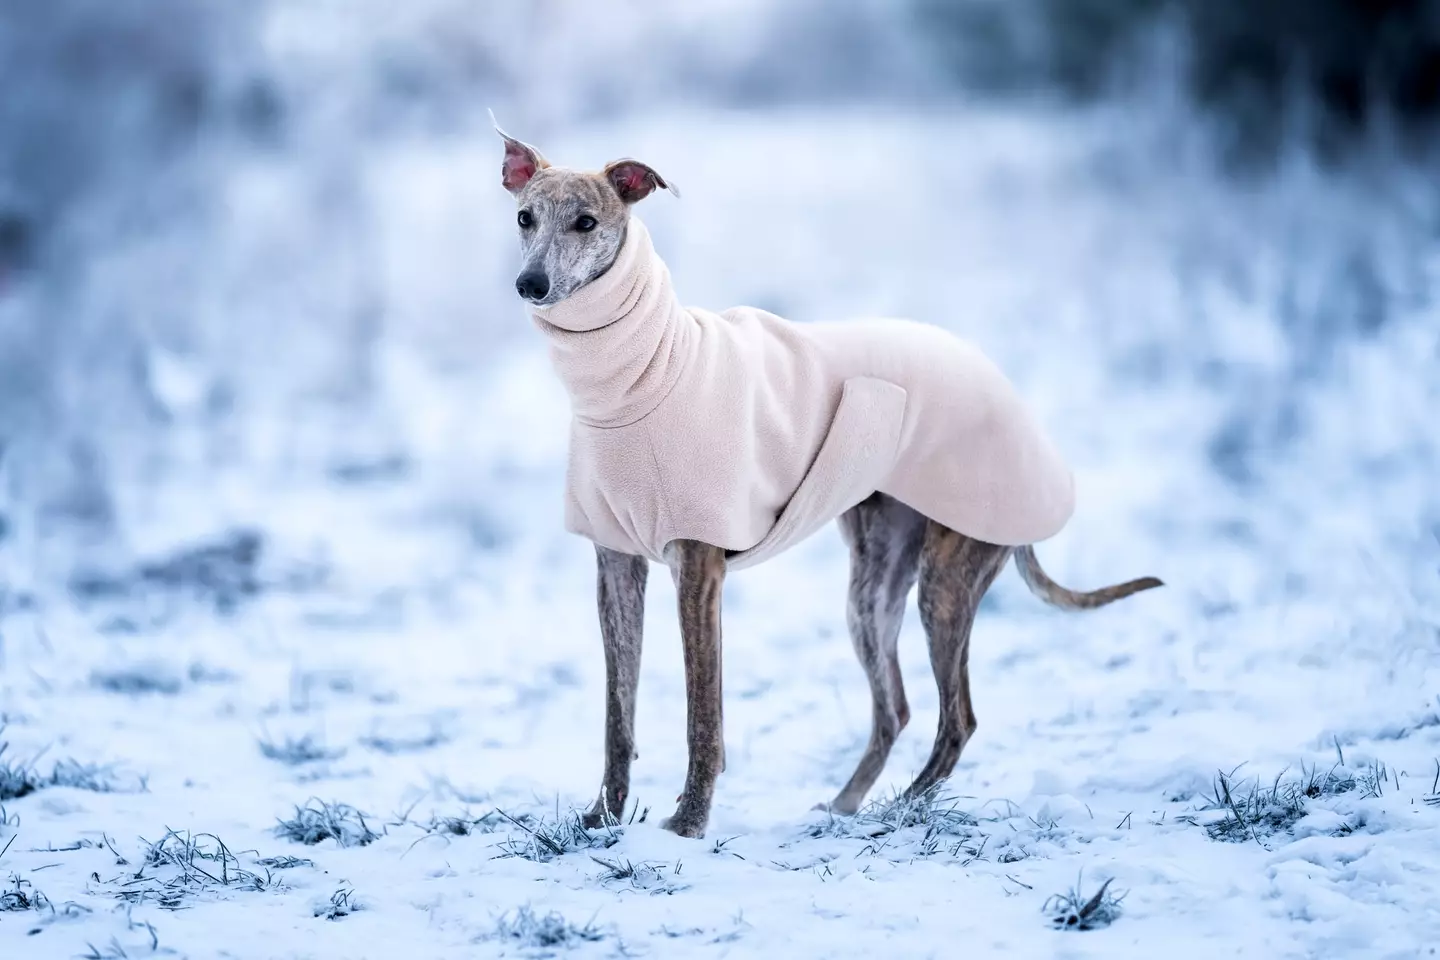 Whippets are an example of a dog that might be more vulnerable to the cold.